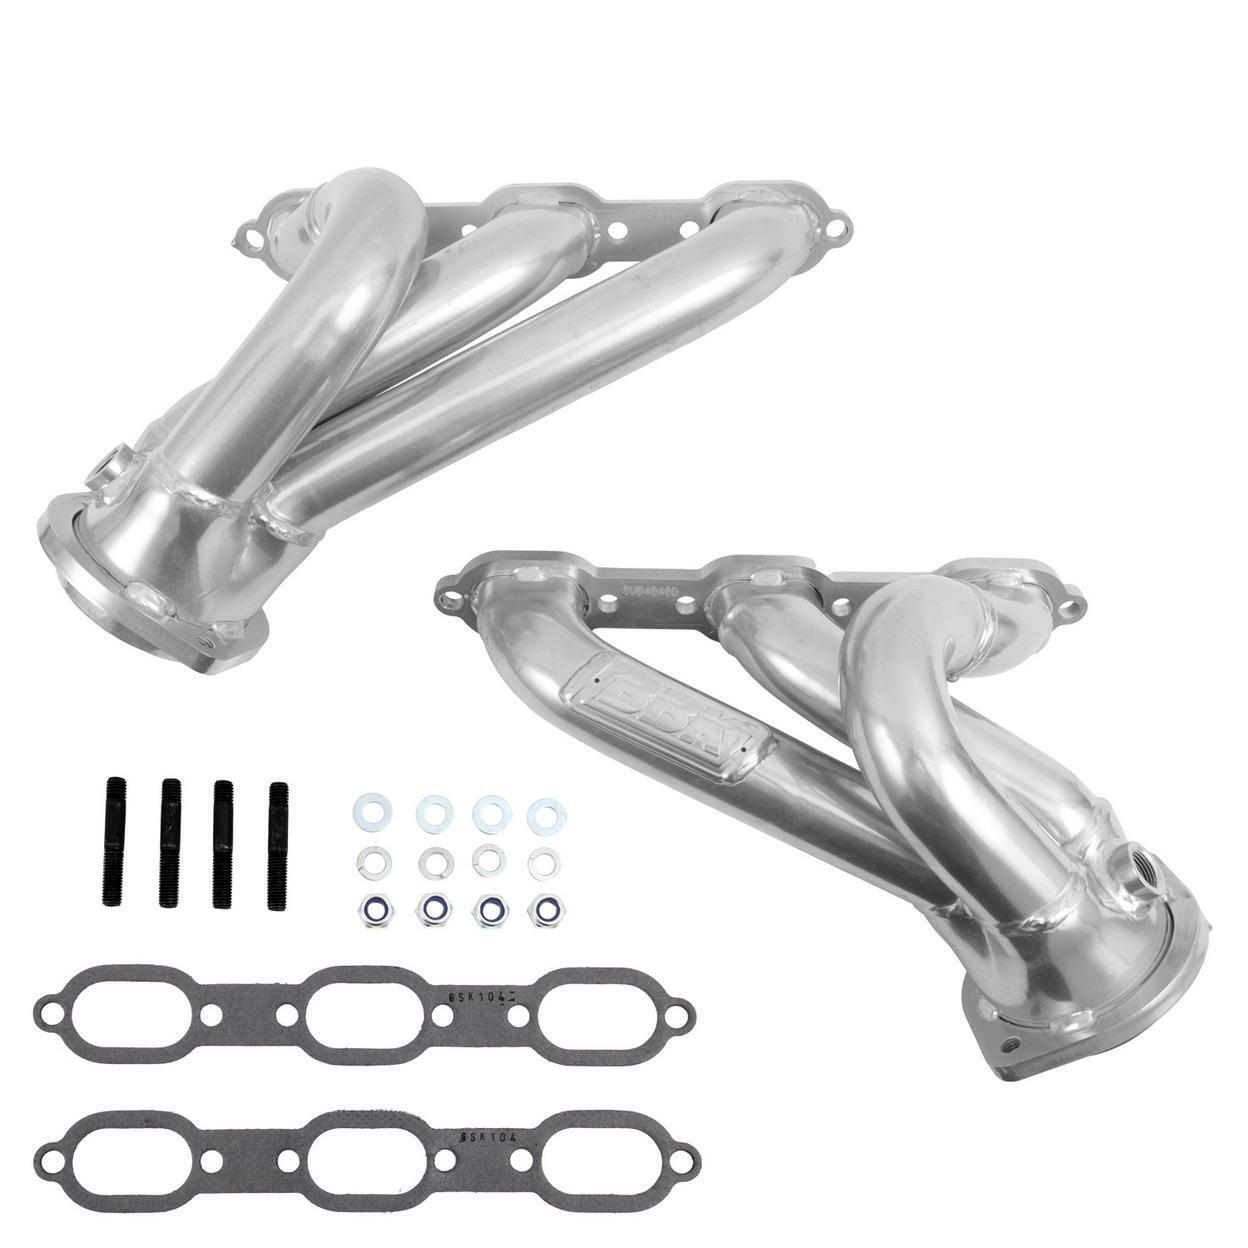 BBK Performance 40400 2006-10 CHARGER CHALLENGER 3.5L SHORTY EXHAUST HEADERS (PO